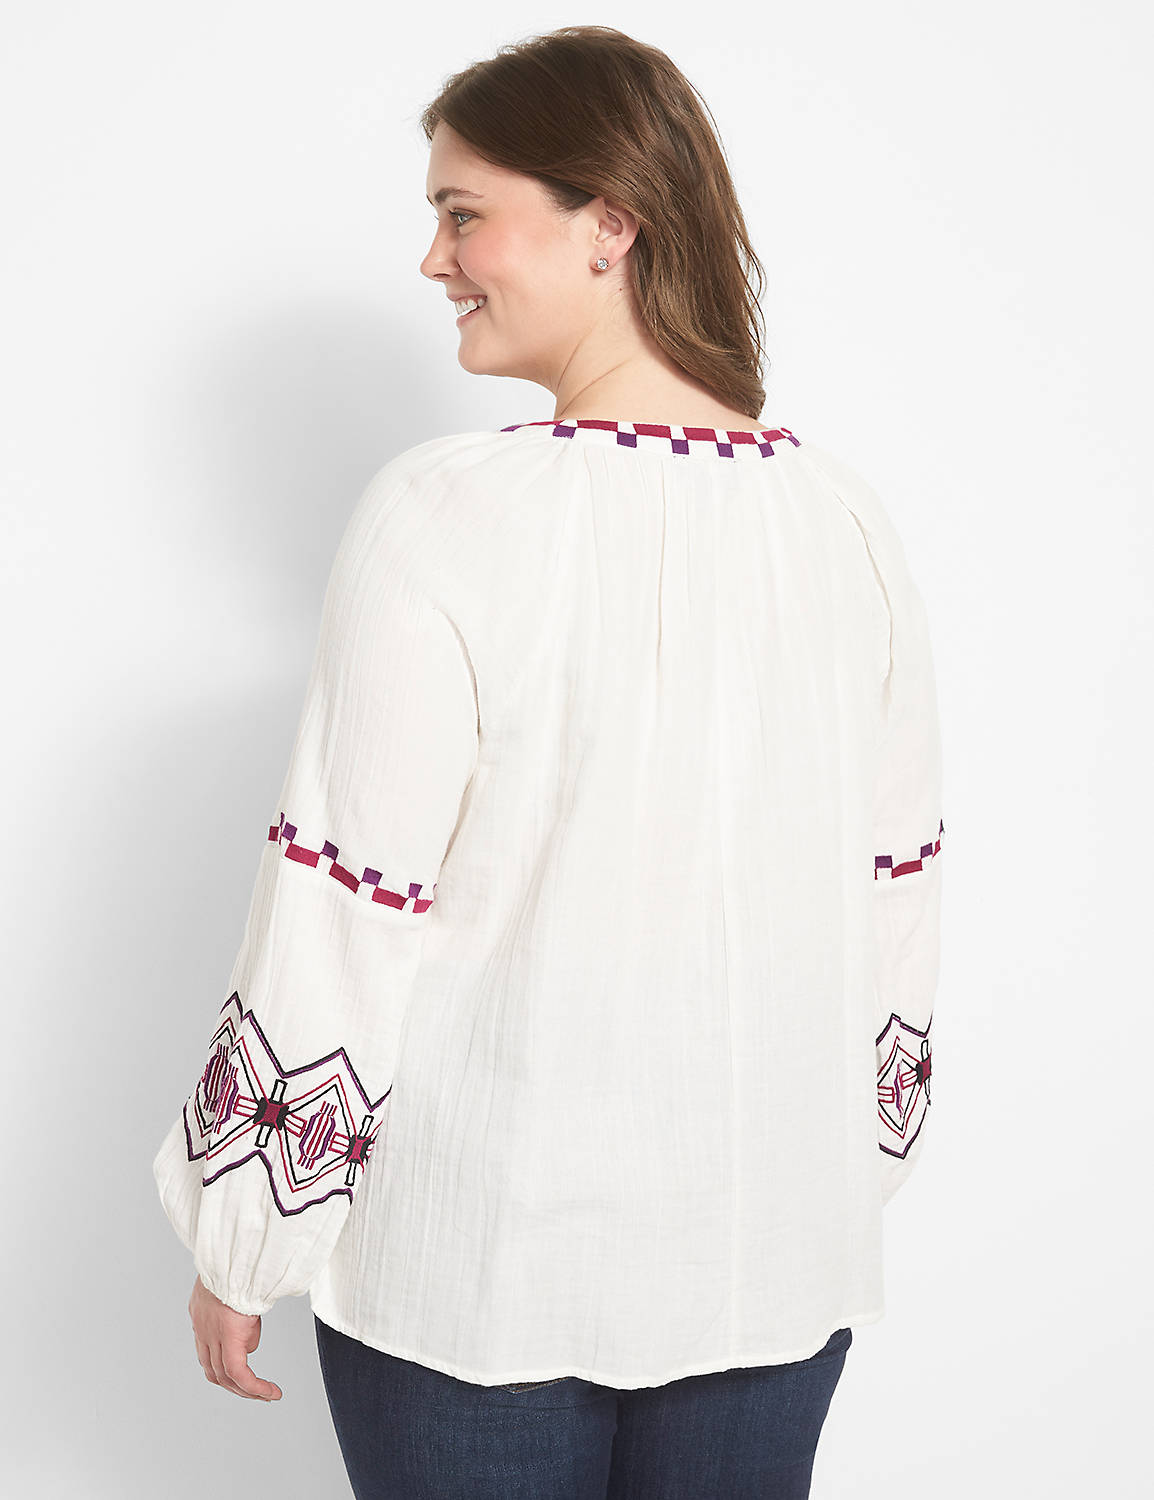 Long Sleeve Split Neck Embroidered Product Image 2